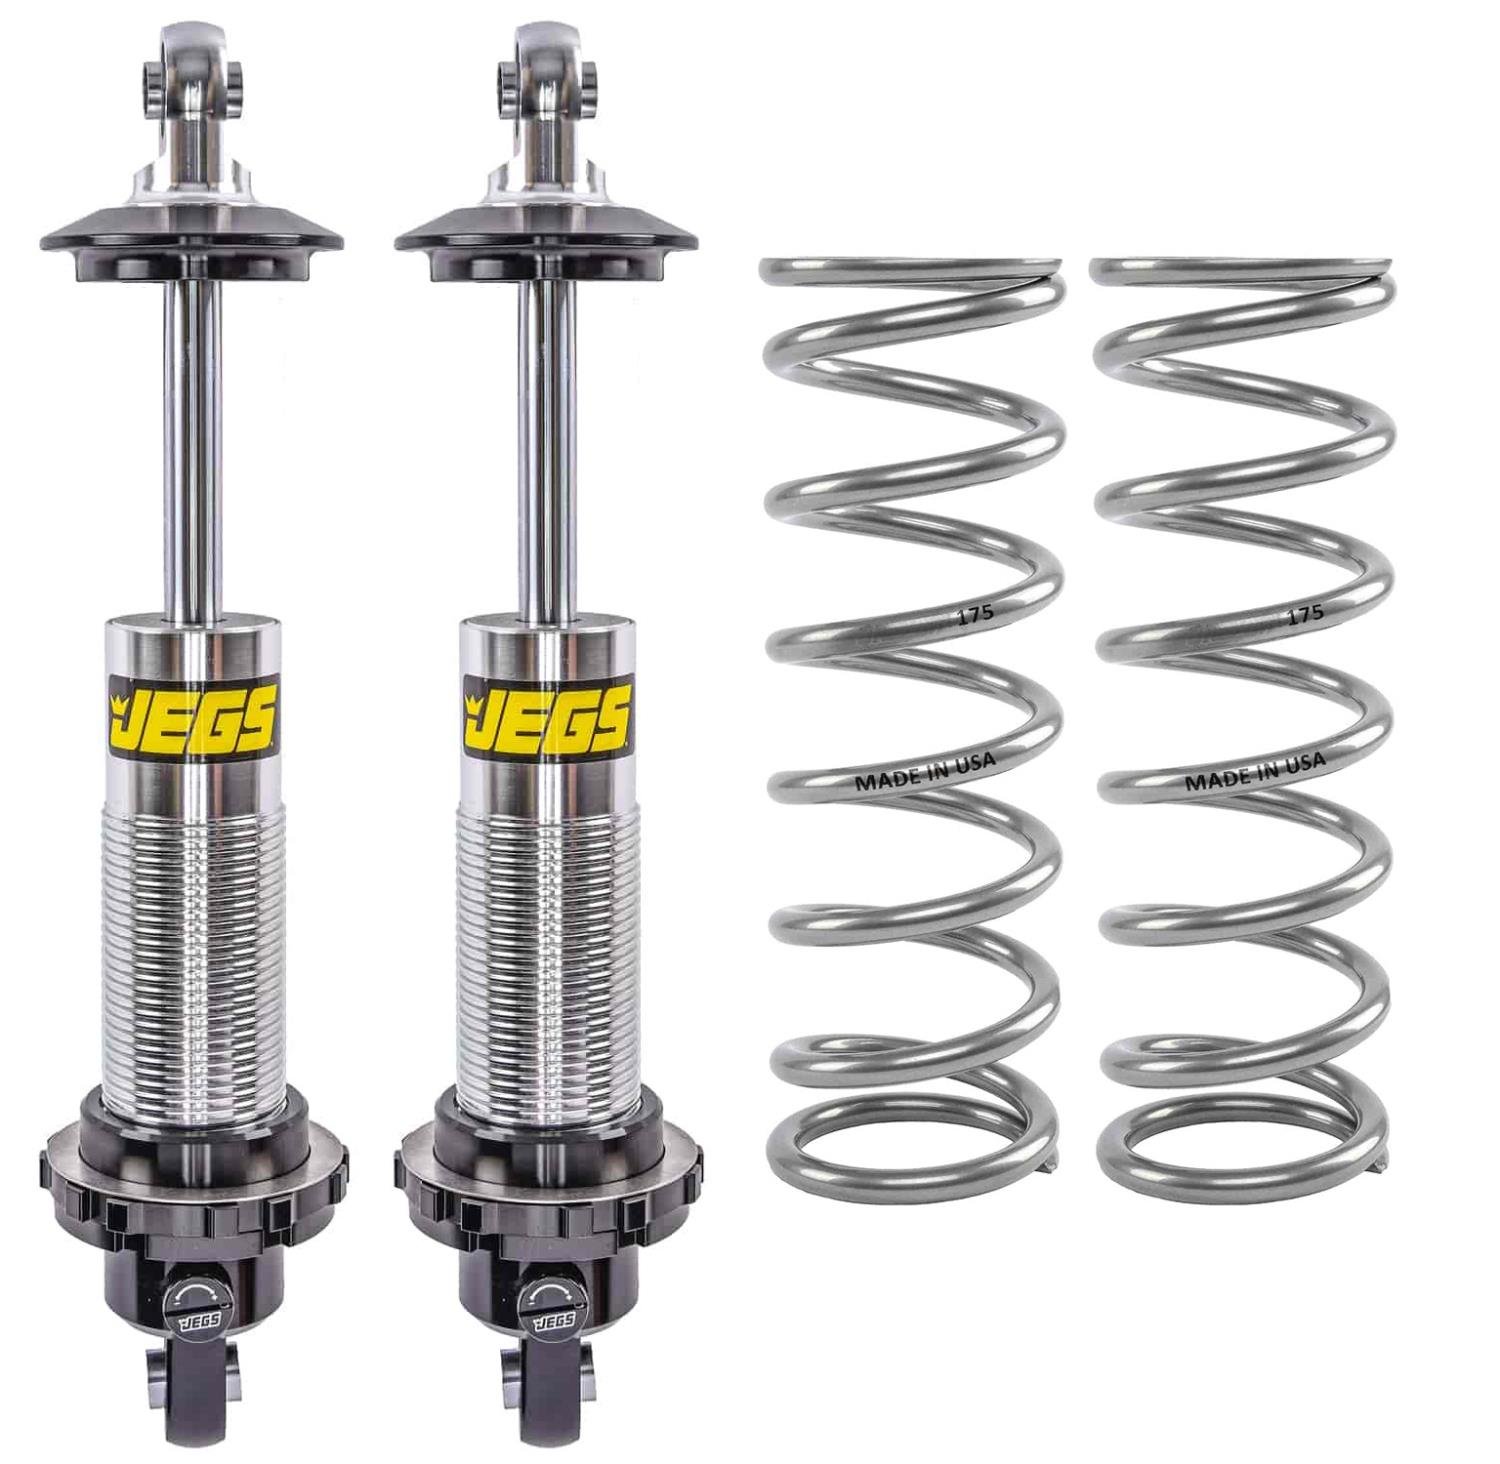 Single Adjustable Coil-Over Shocks and Coil-Over Springs Kit [10 in., 175 lbs./in. Springs]